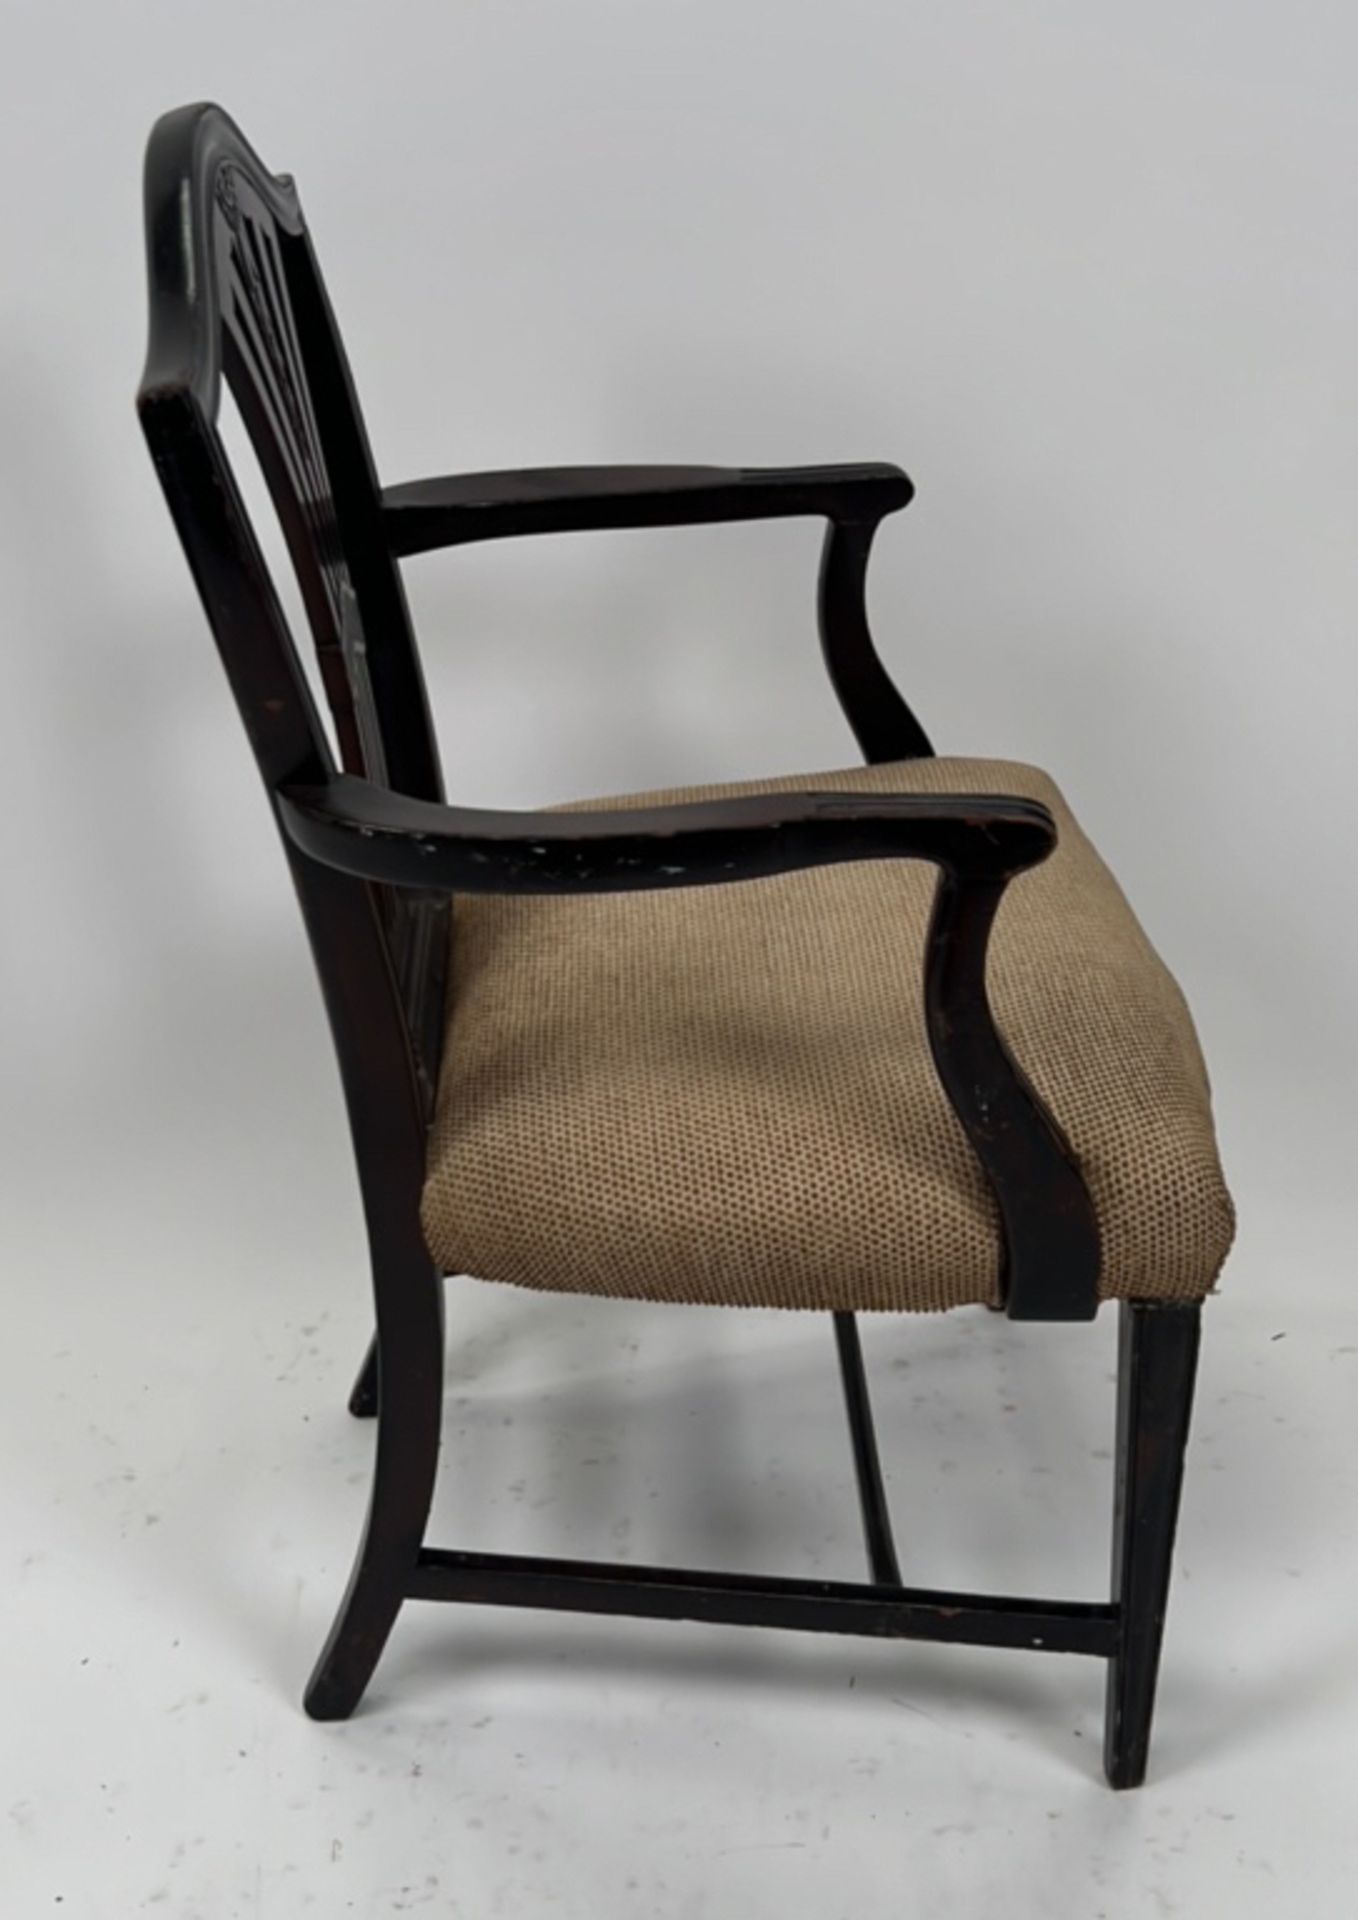 Contemporary Dining Chair - Image 2 of 18